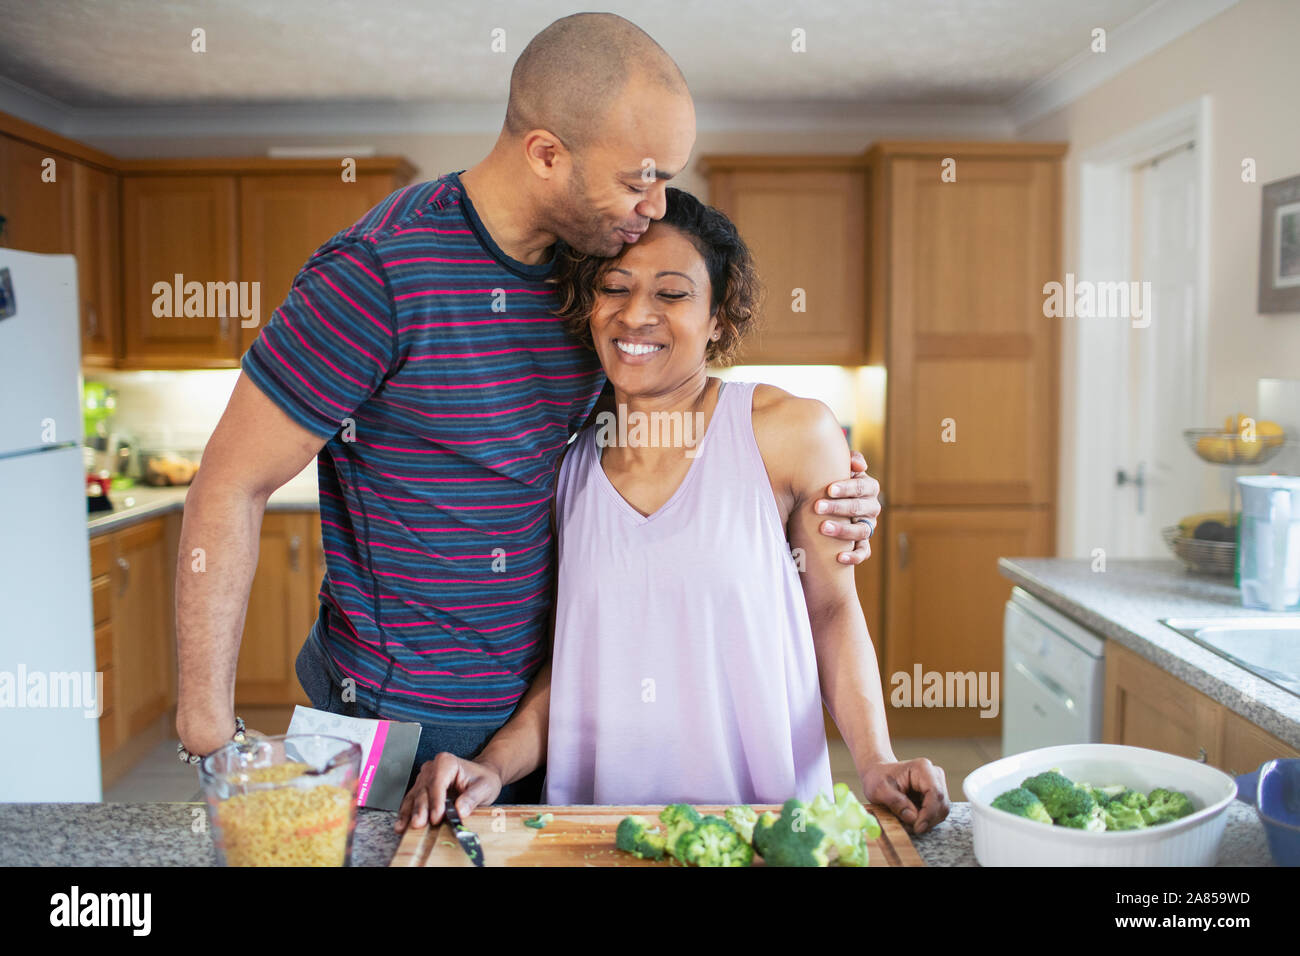 Affectionate husband hugging wife cooking in kitchen Stock Photo